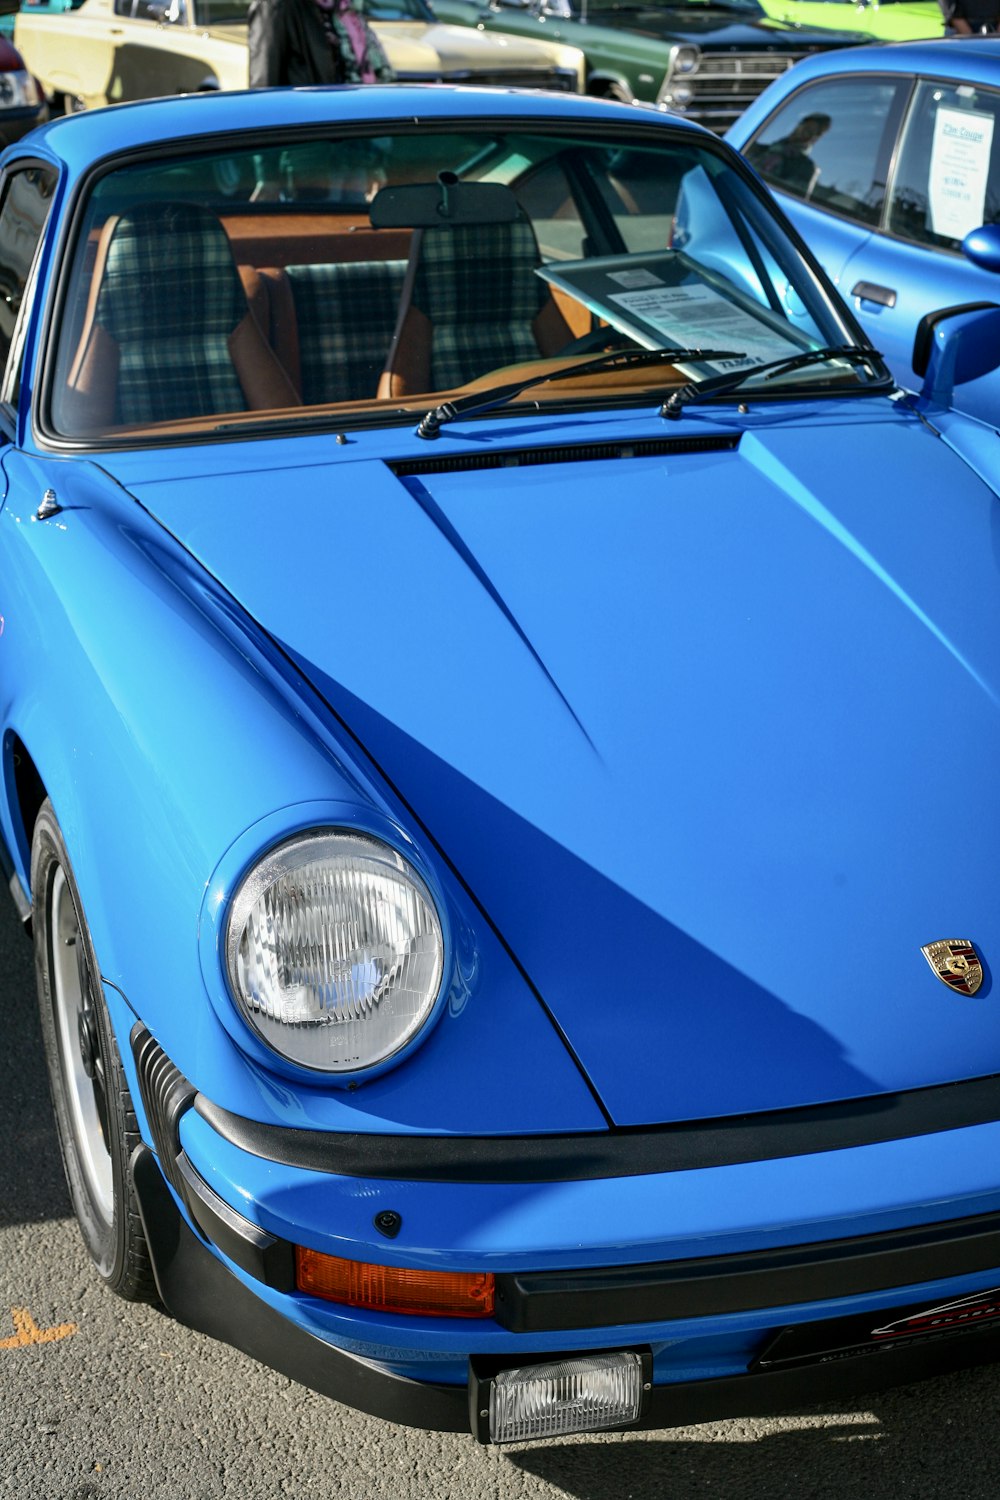 a blue sports car parked in a parking lot